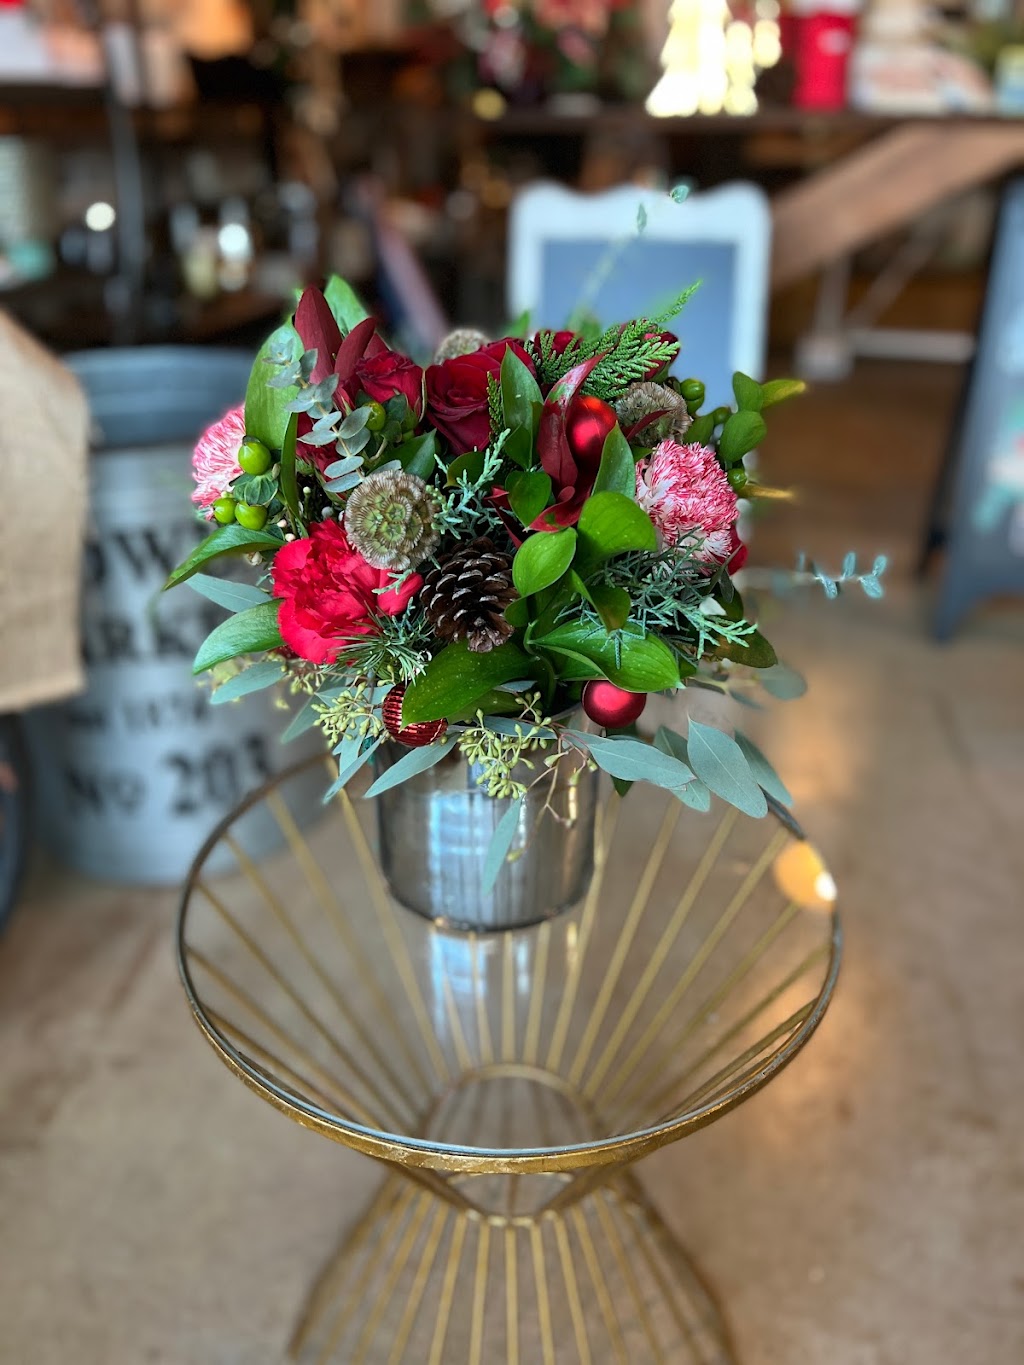 Bloom-A-Round Floral Design by Delilah Jean | 2451 Lakeside Pkwy #120, Flower Mound, TX 75022, USA | Phone: (214) 222-5995